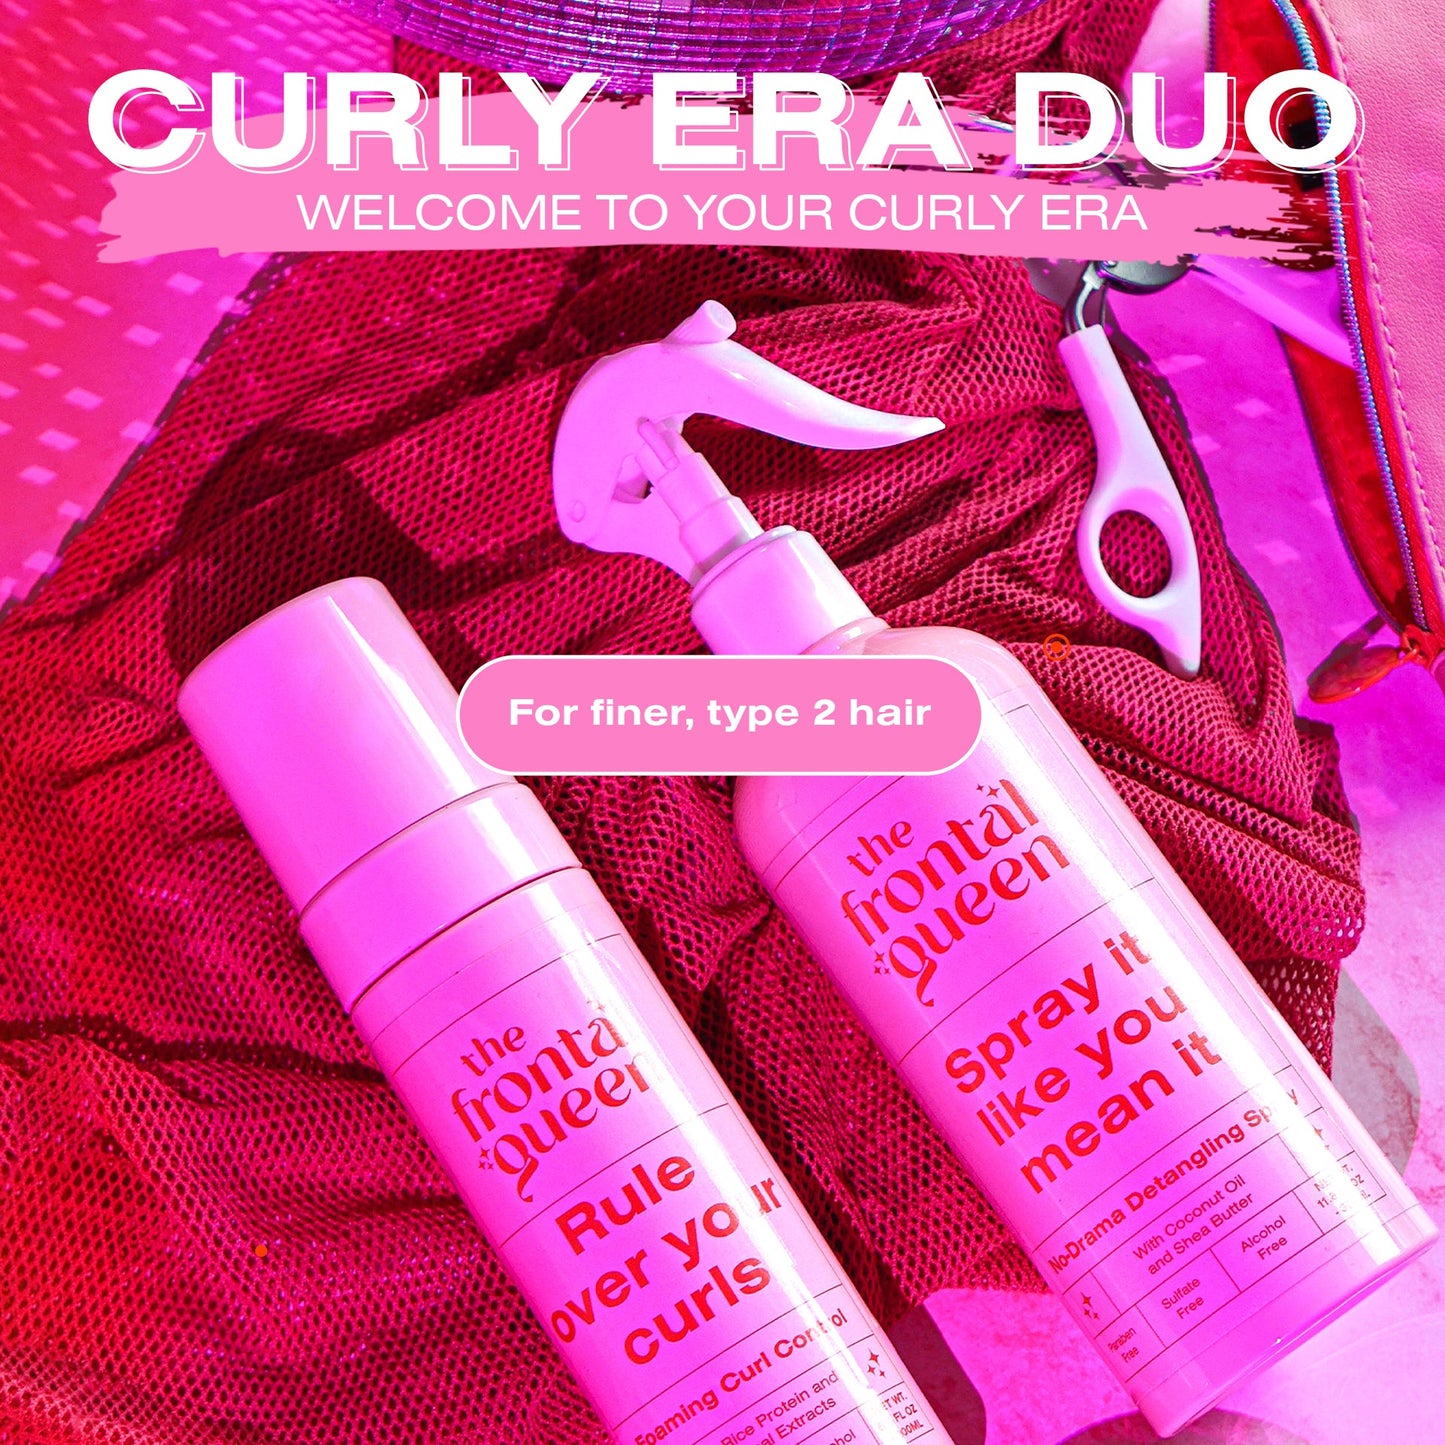 Curly Era Duo - The Frontal Queen